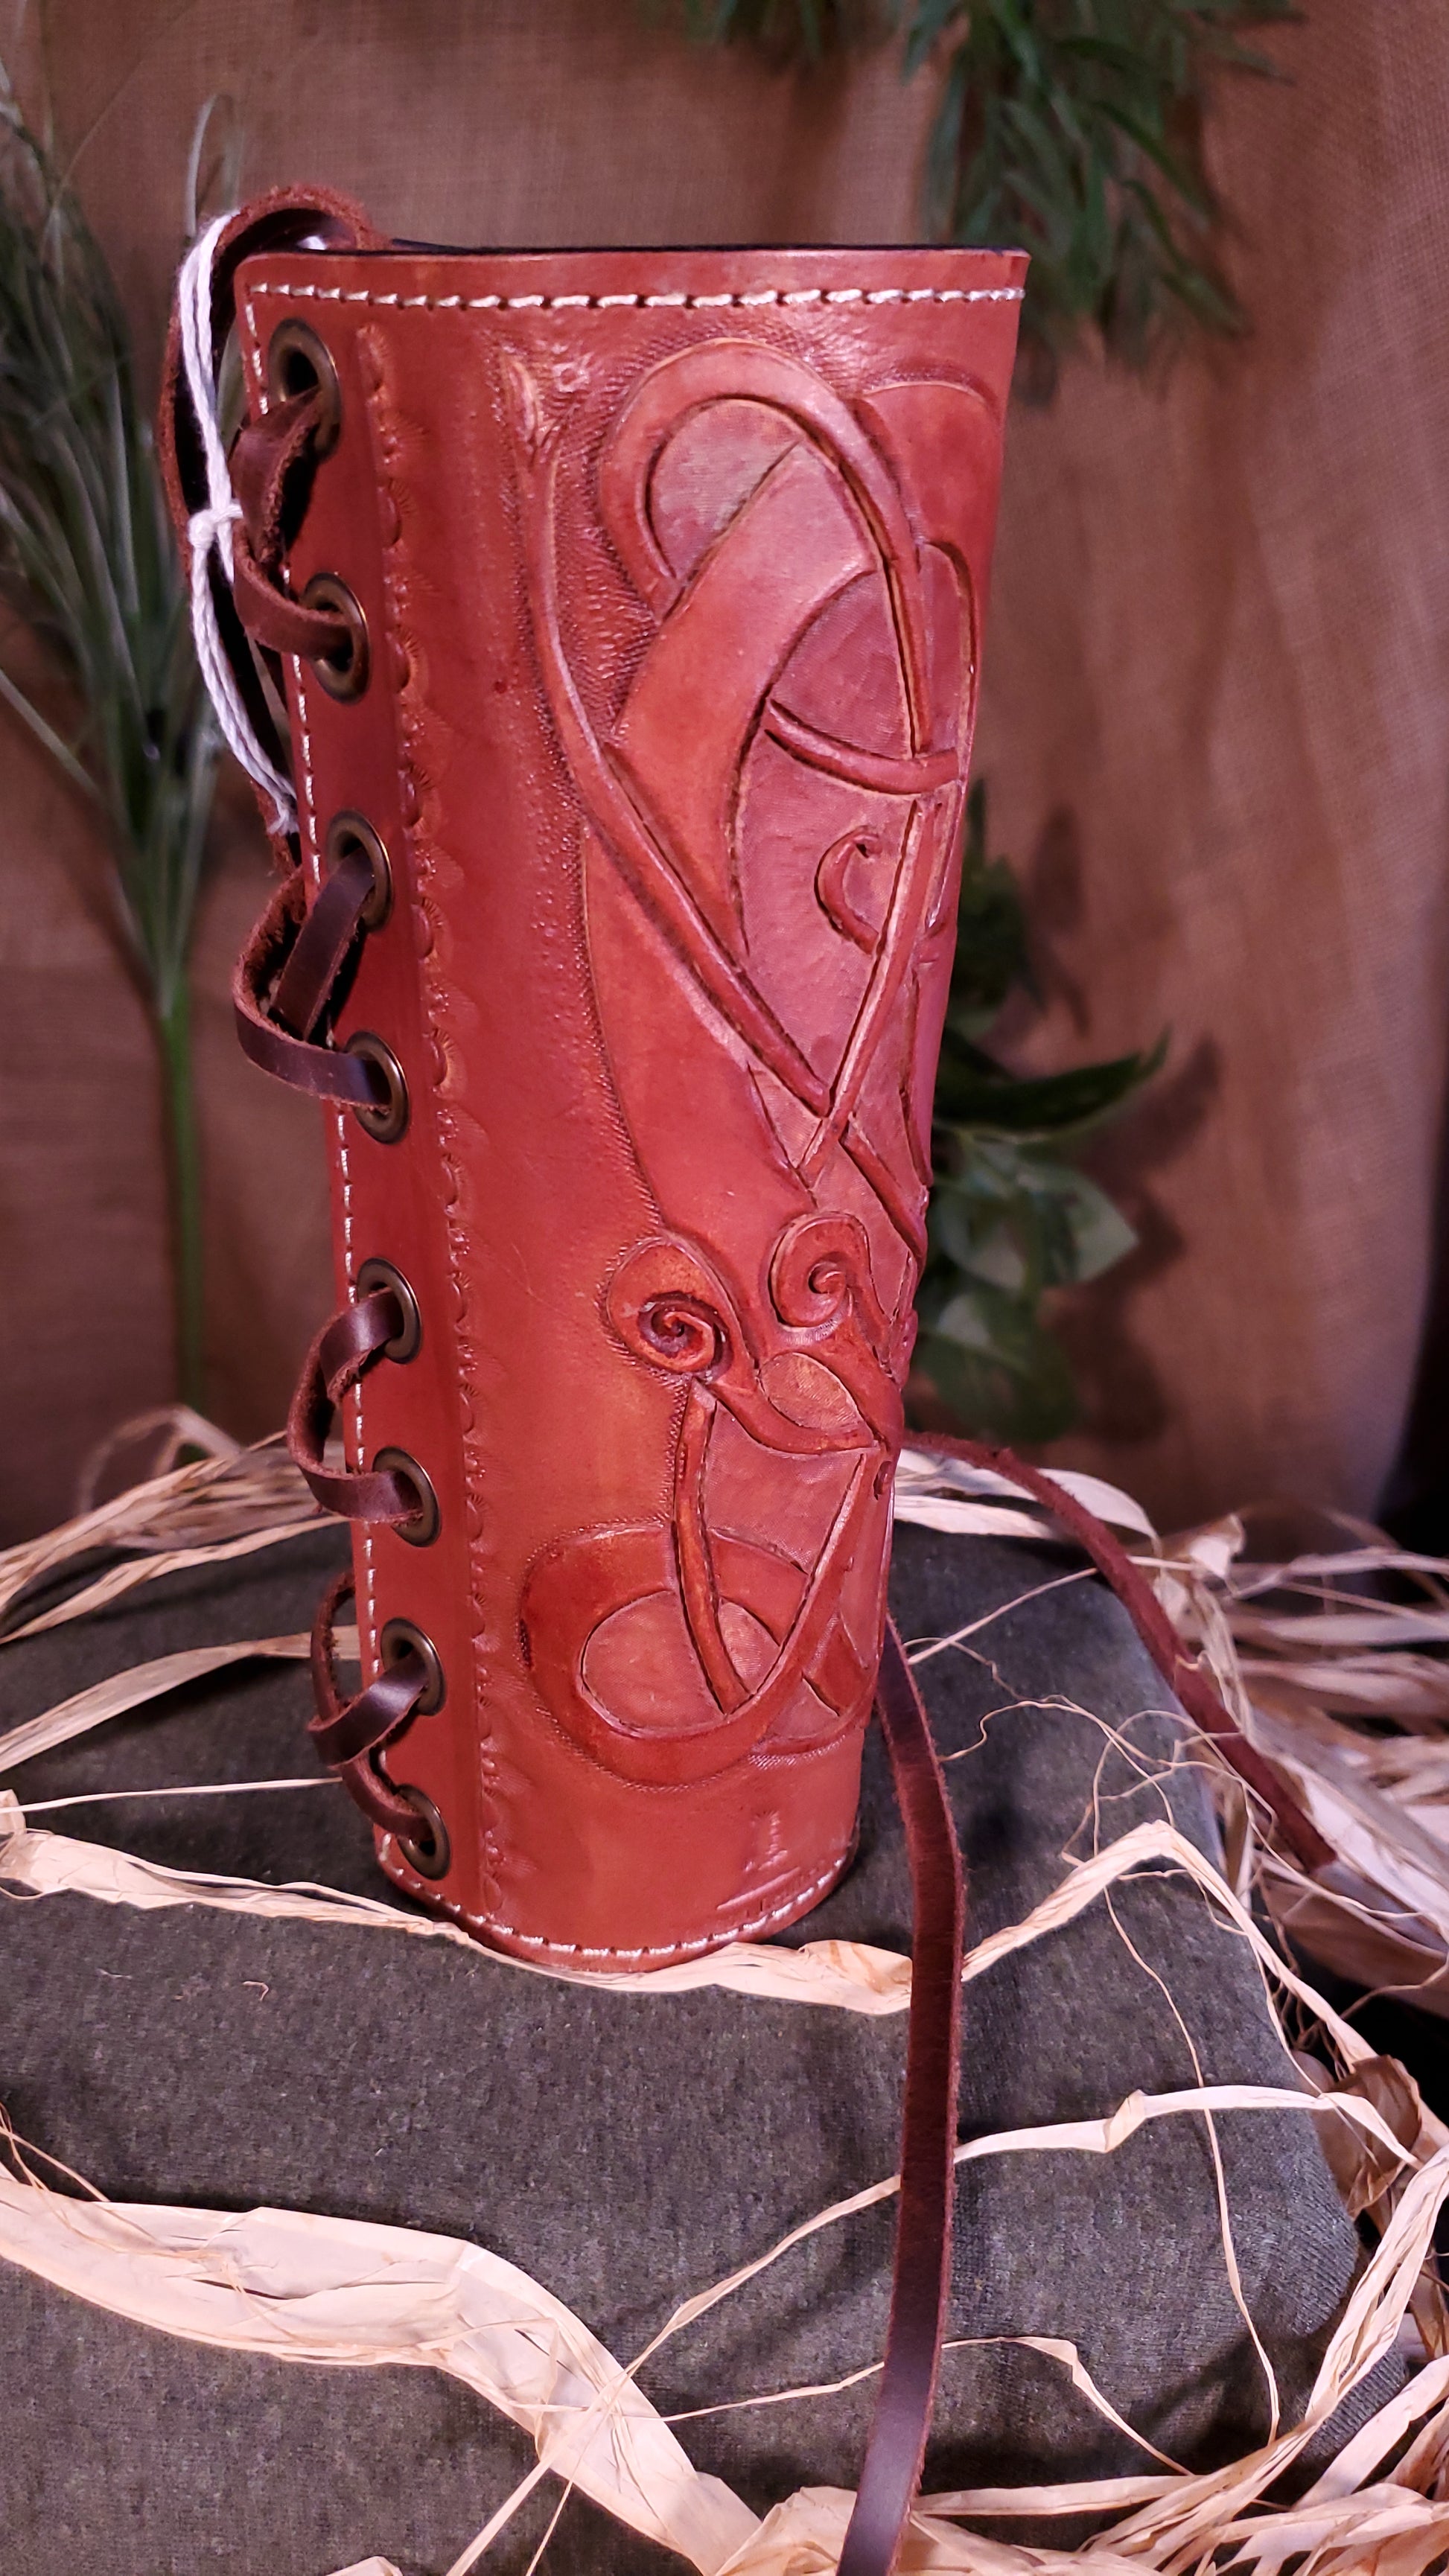 Side view of the small Bracer/Arm Guard. Showcasing the border stamps, as well as the lace and the grommets the lace goes through